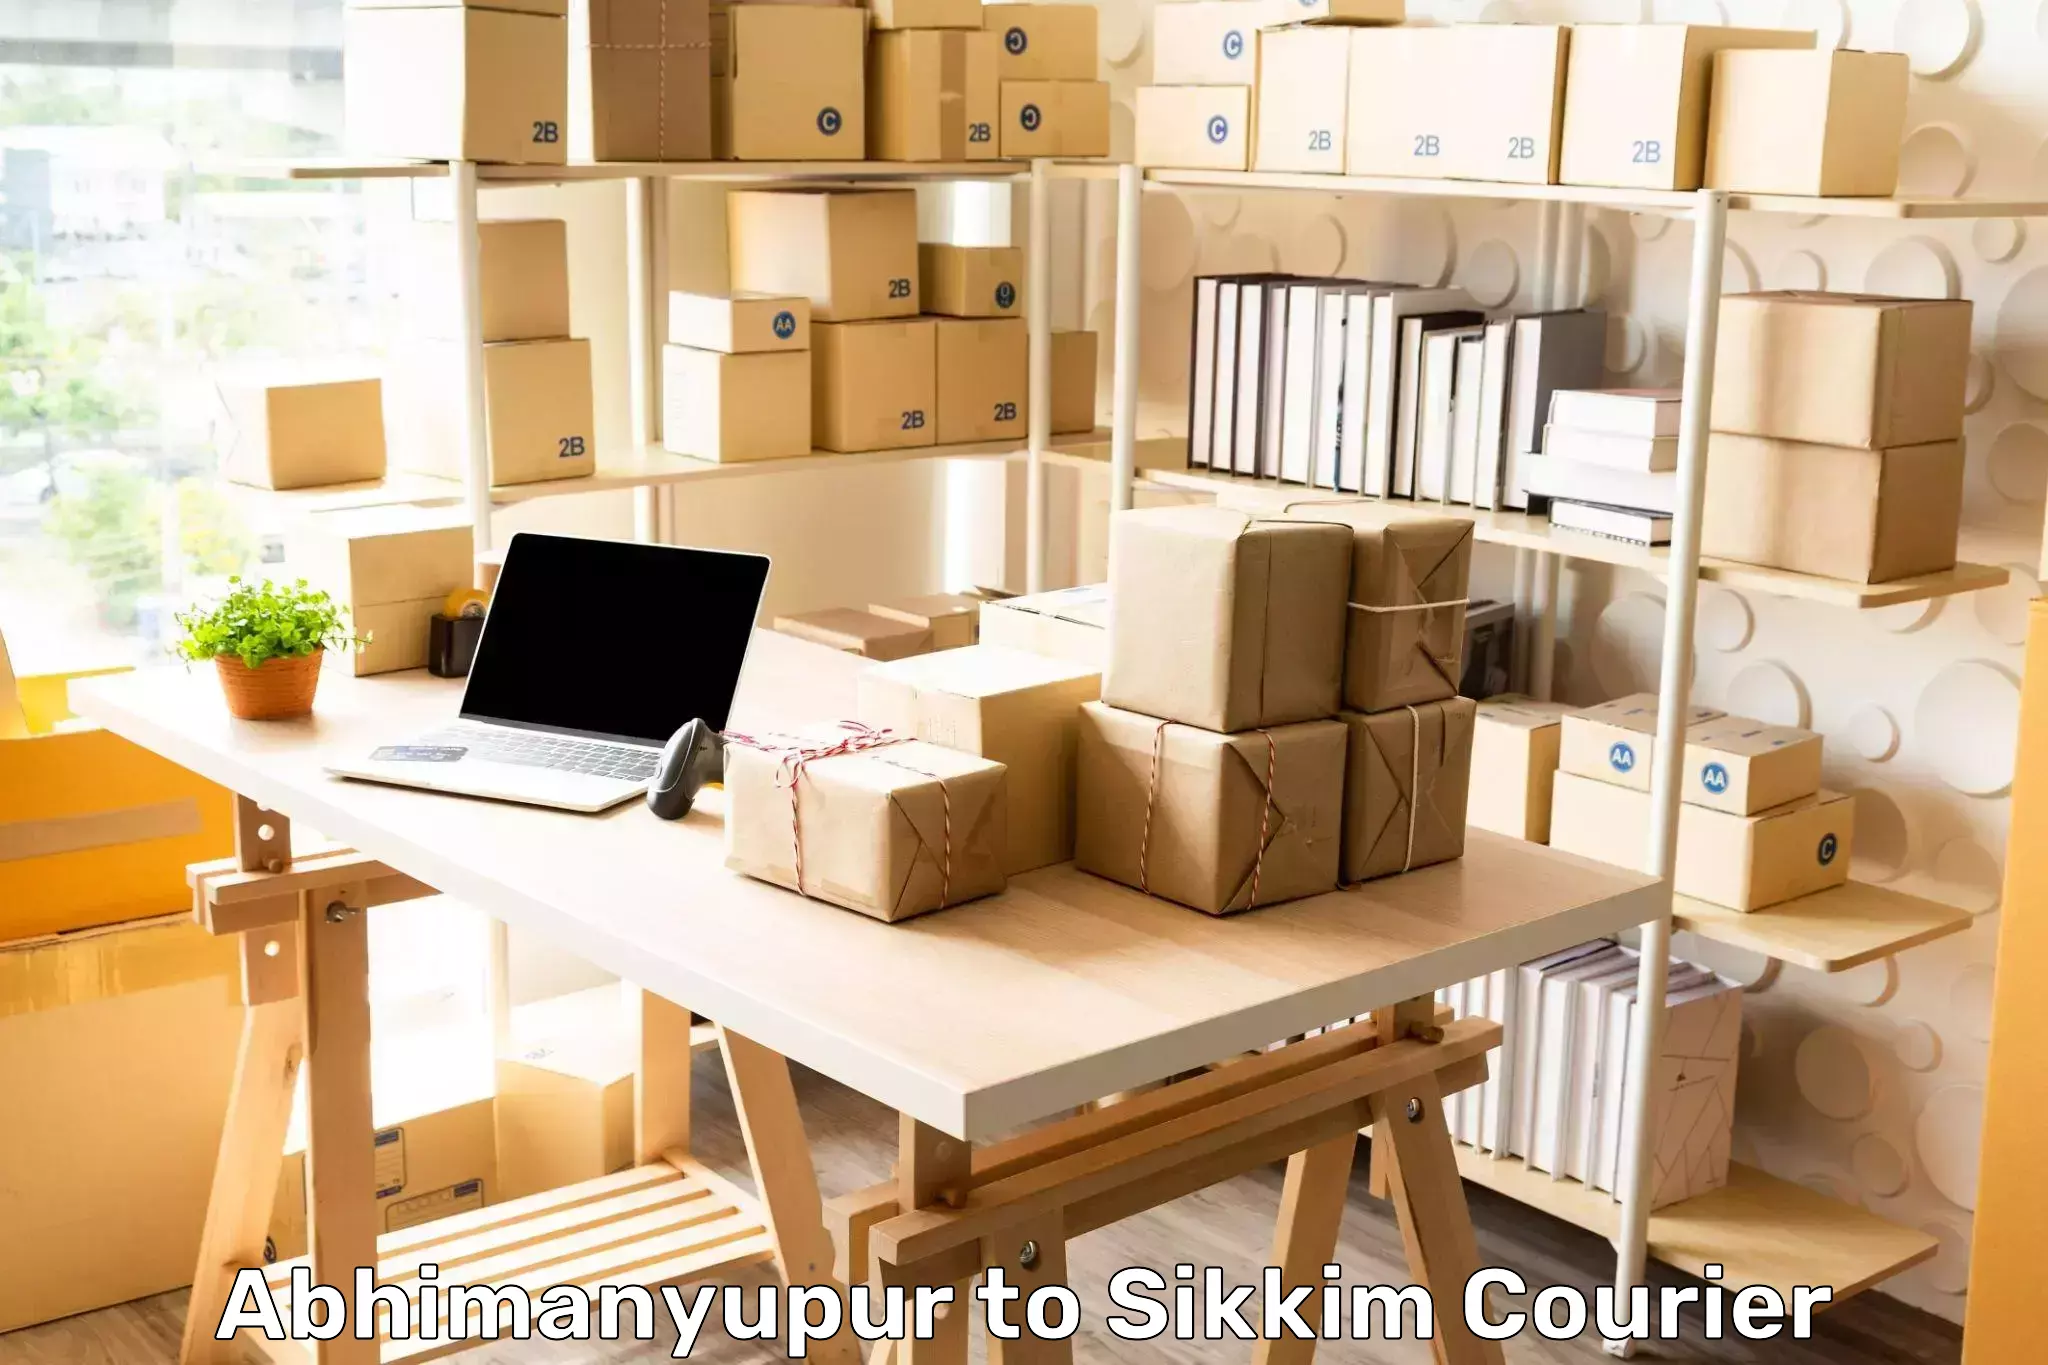 Online package tracking Abhimanyupur to Sikkim